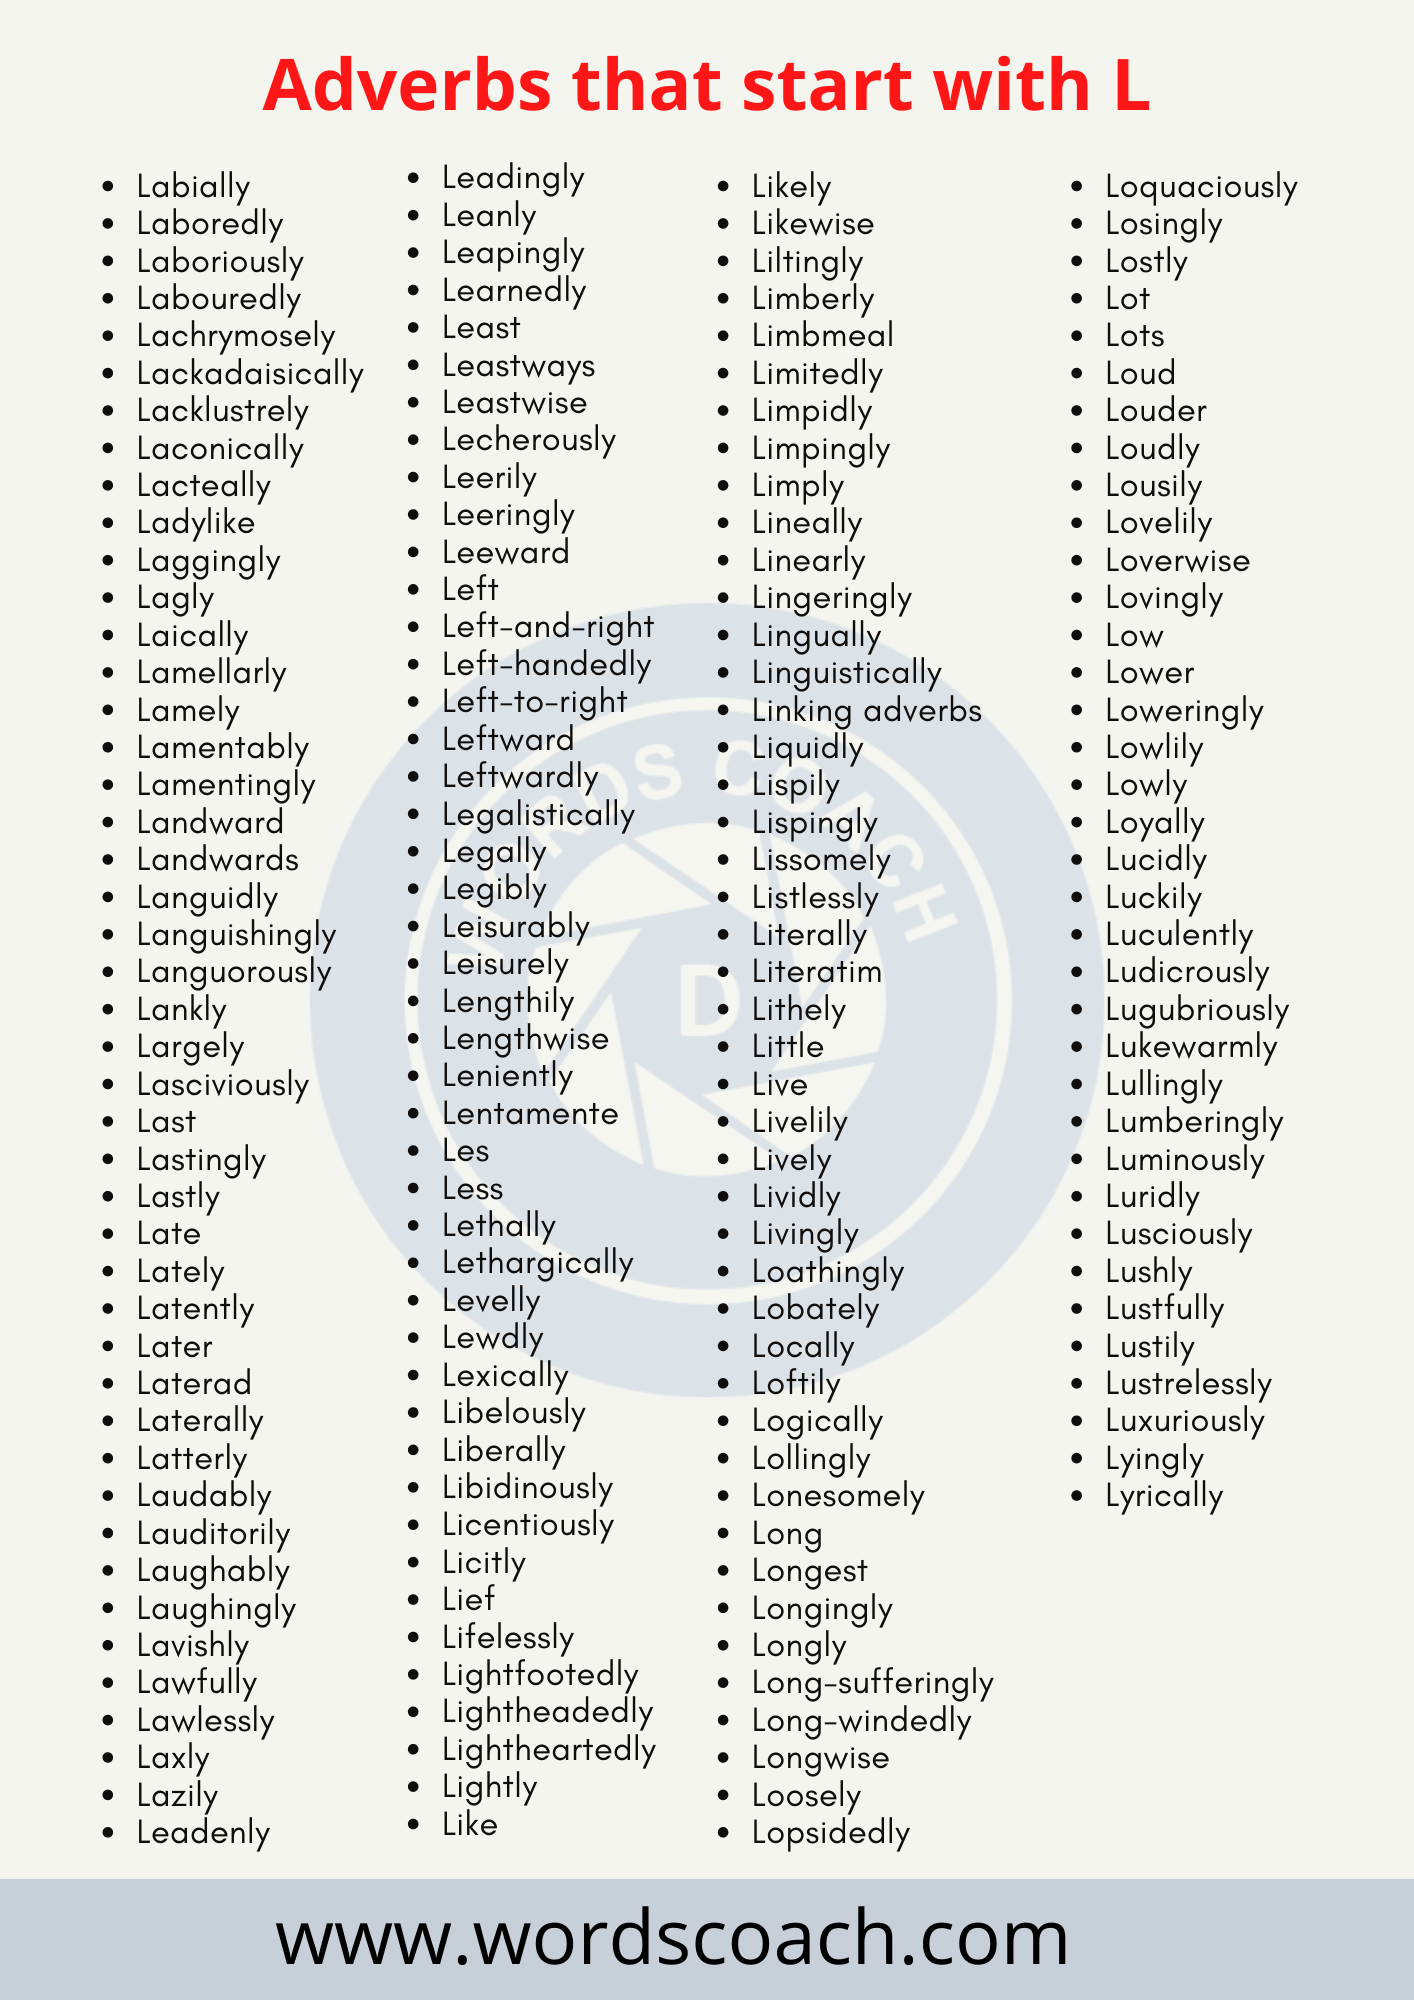 Adverbs that start with L - wordscoach.com